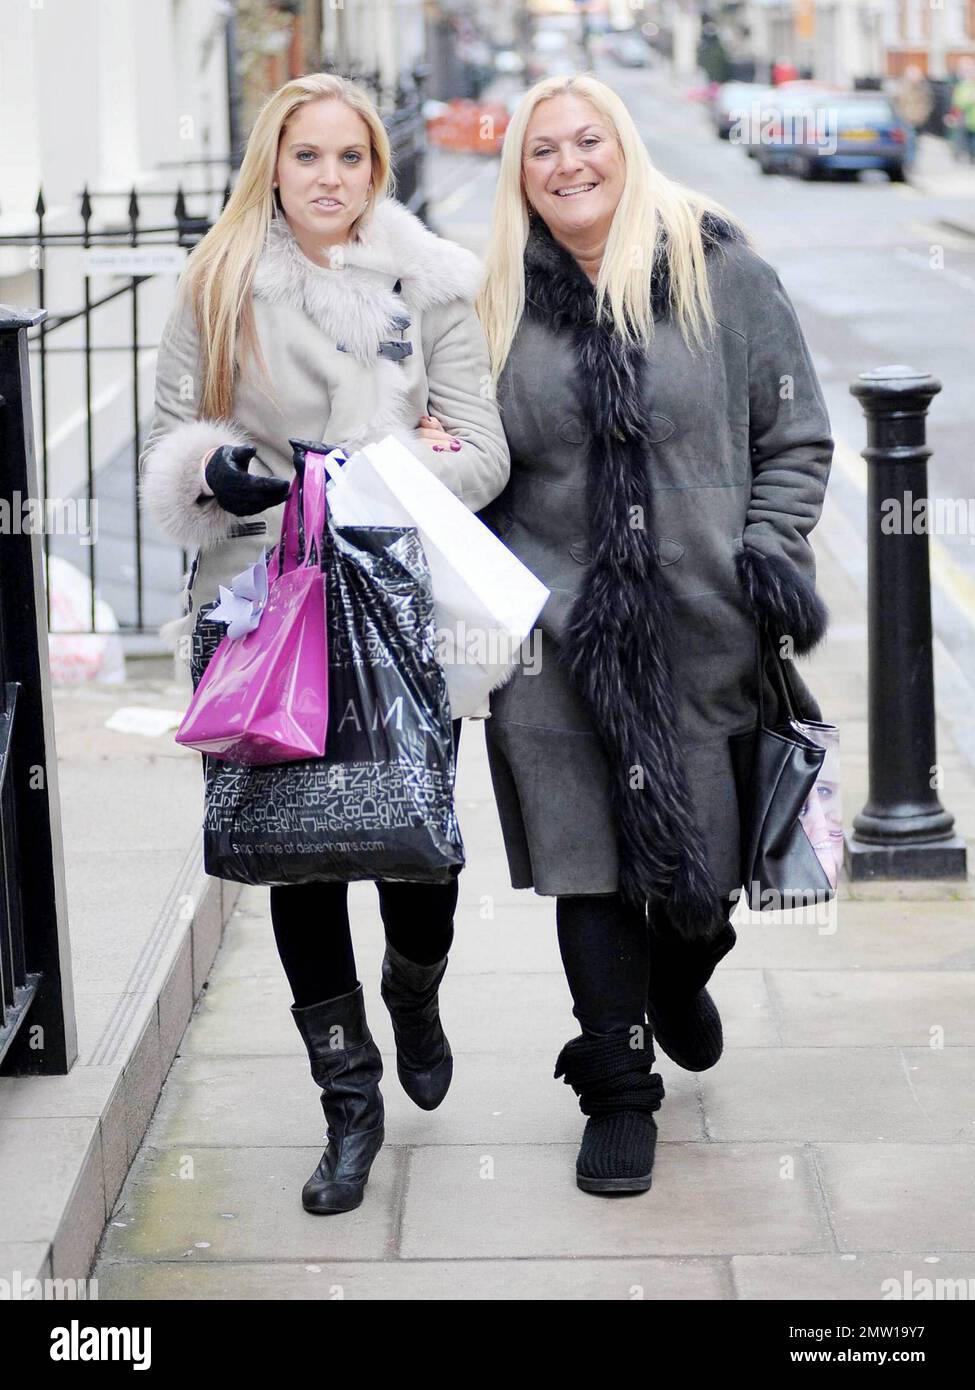 It appears that BBC Radio personality Vanessa Feltz's new schedule is  weighing on her, as she looked a bit tired and irritable as she and  daughter Allegra, 24, made their way to